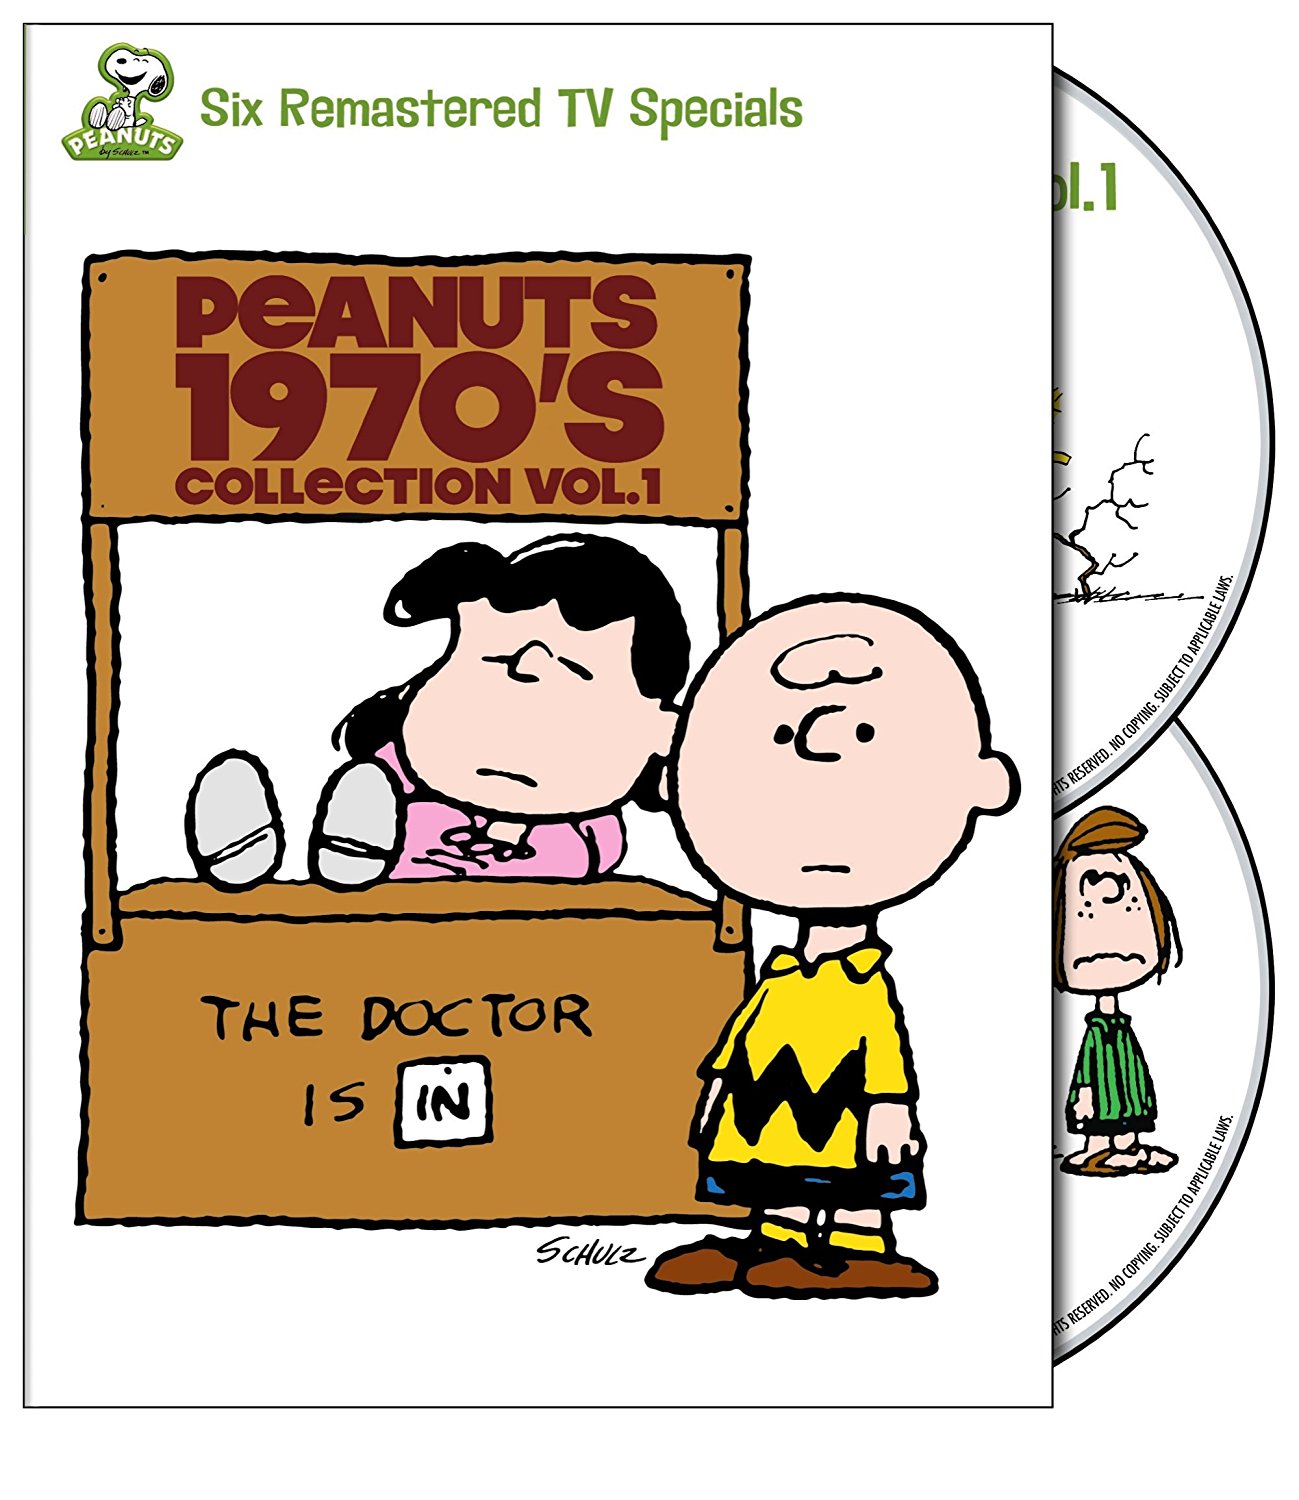 Amazon.com: Peanuts: 1970's Collection, Vol. 1 (It's a Mystery ...